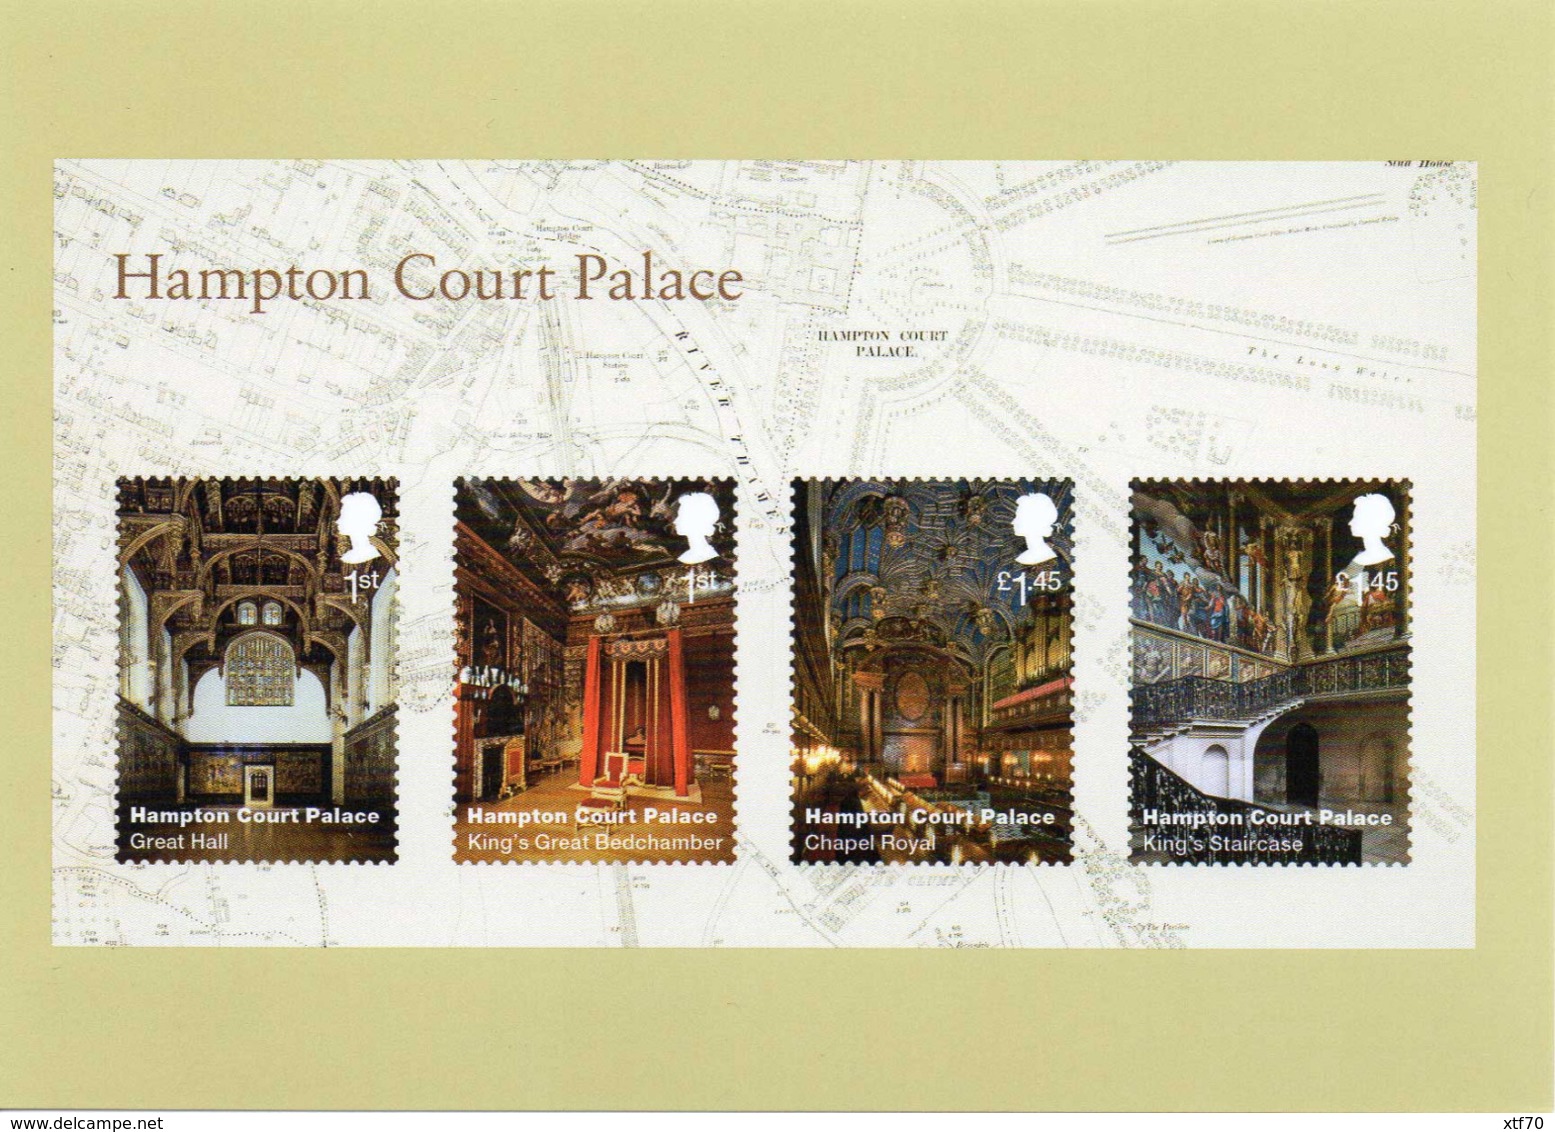 GREAT BRITAIN 2018 Hampton Court Palace mint PHQ cards